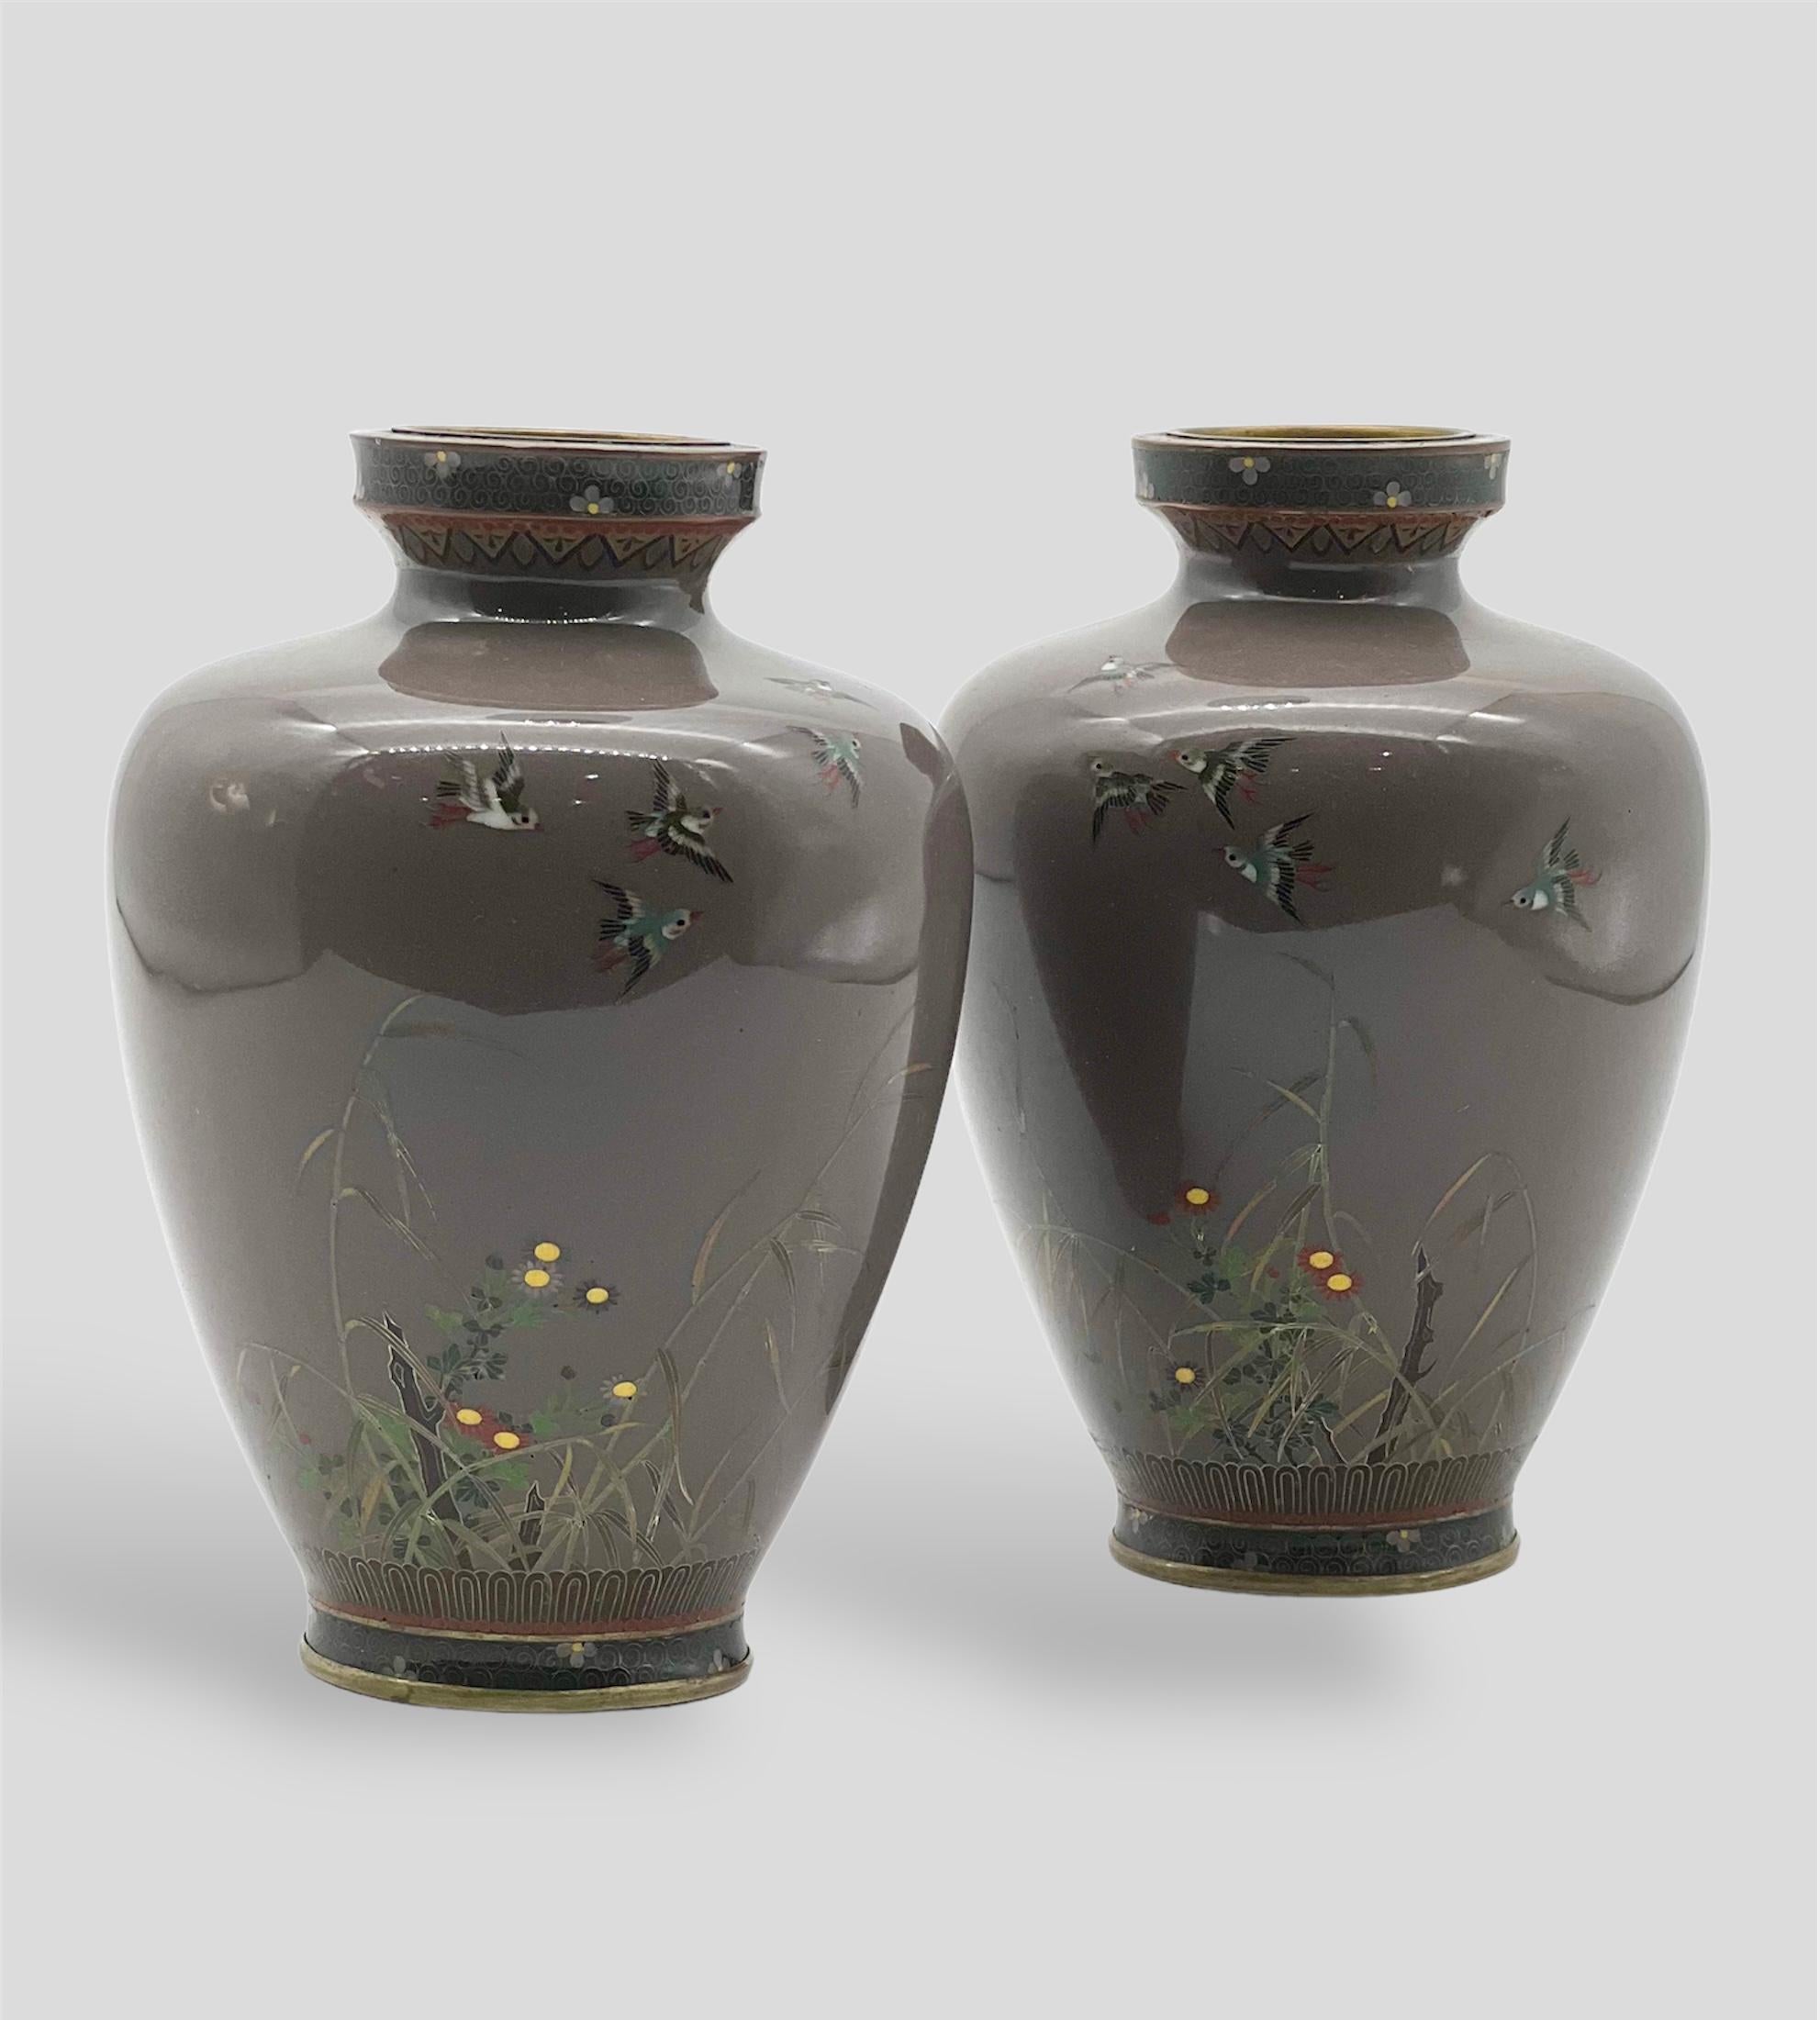 A Fine Pair of Japanese Cloisonne Enamel Vases Attributed to Hayashi Kodenji In Good Condition For Sale In London, GB